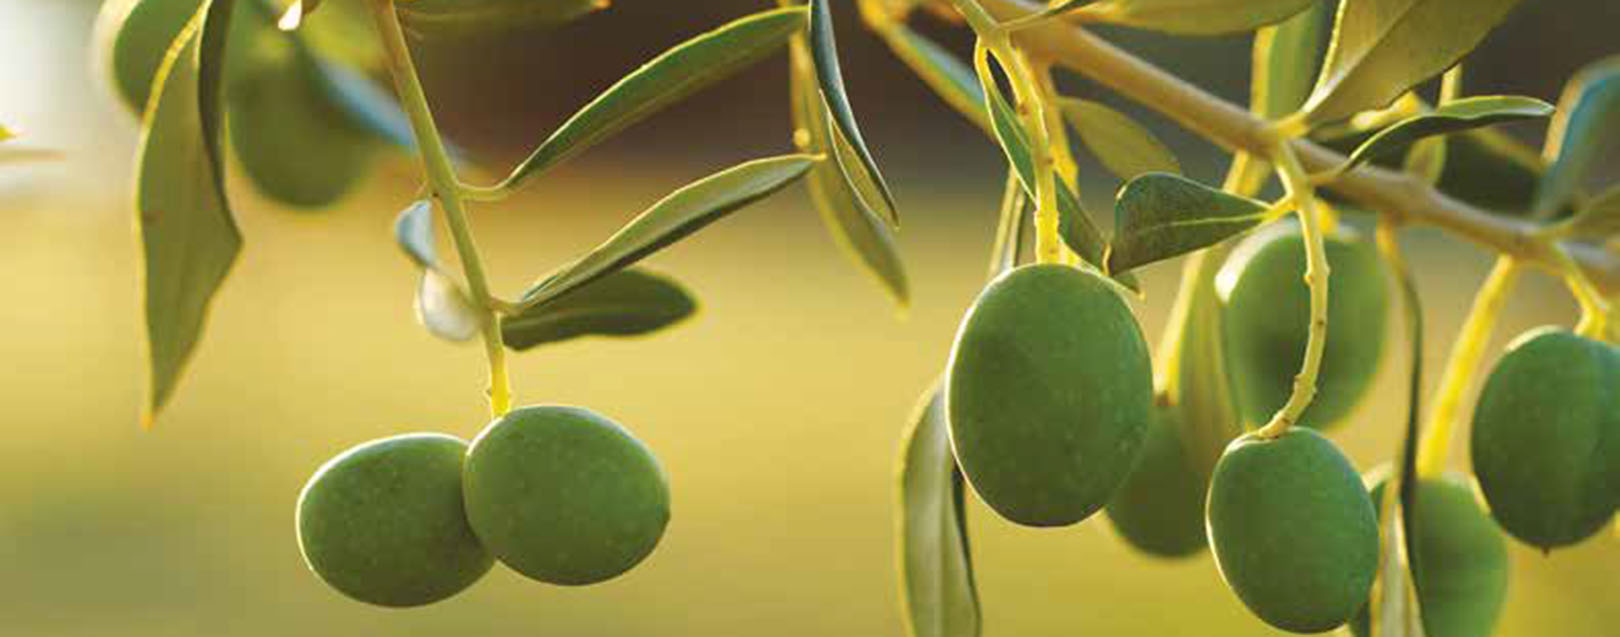 It’s not called Liquid Gold for nothing - Olive Oil March 2018 issue